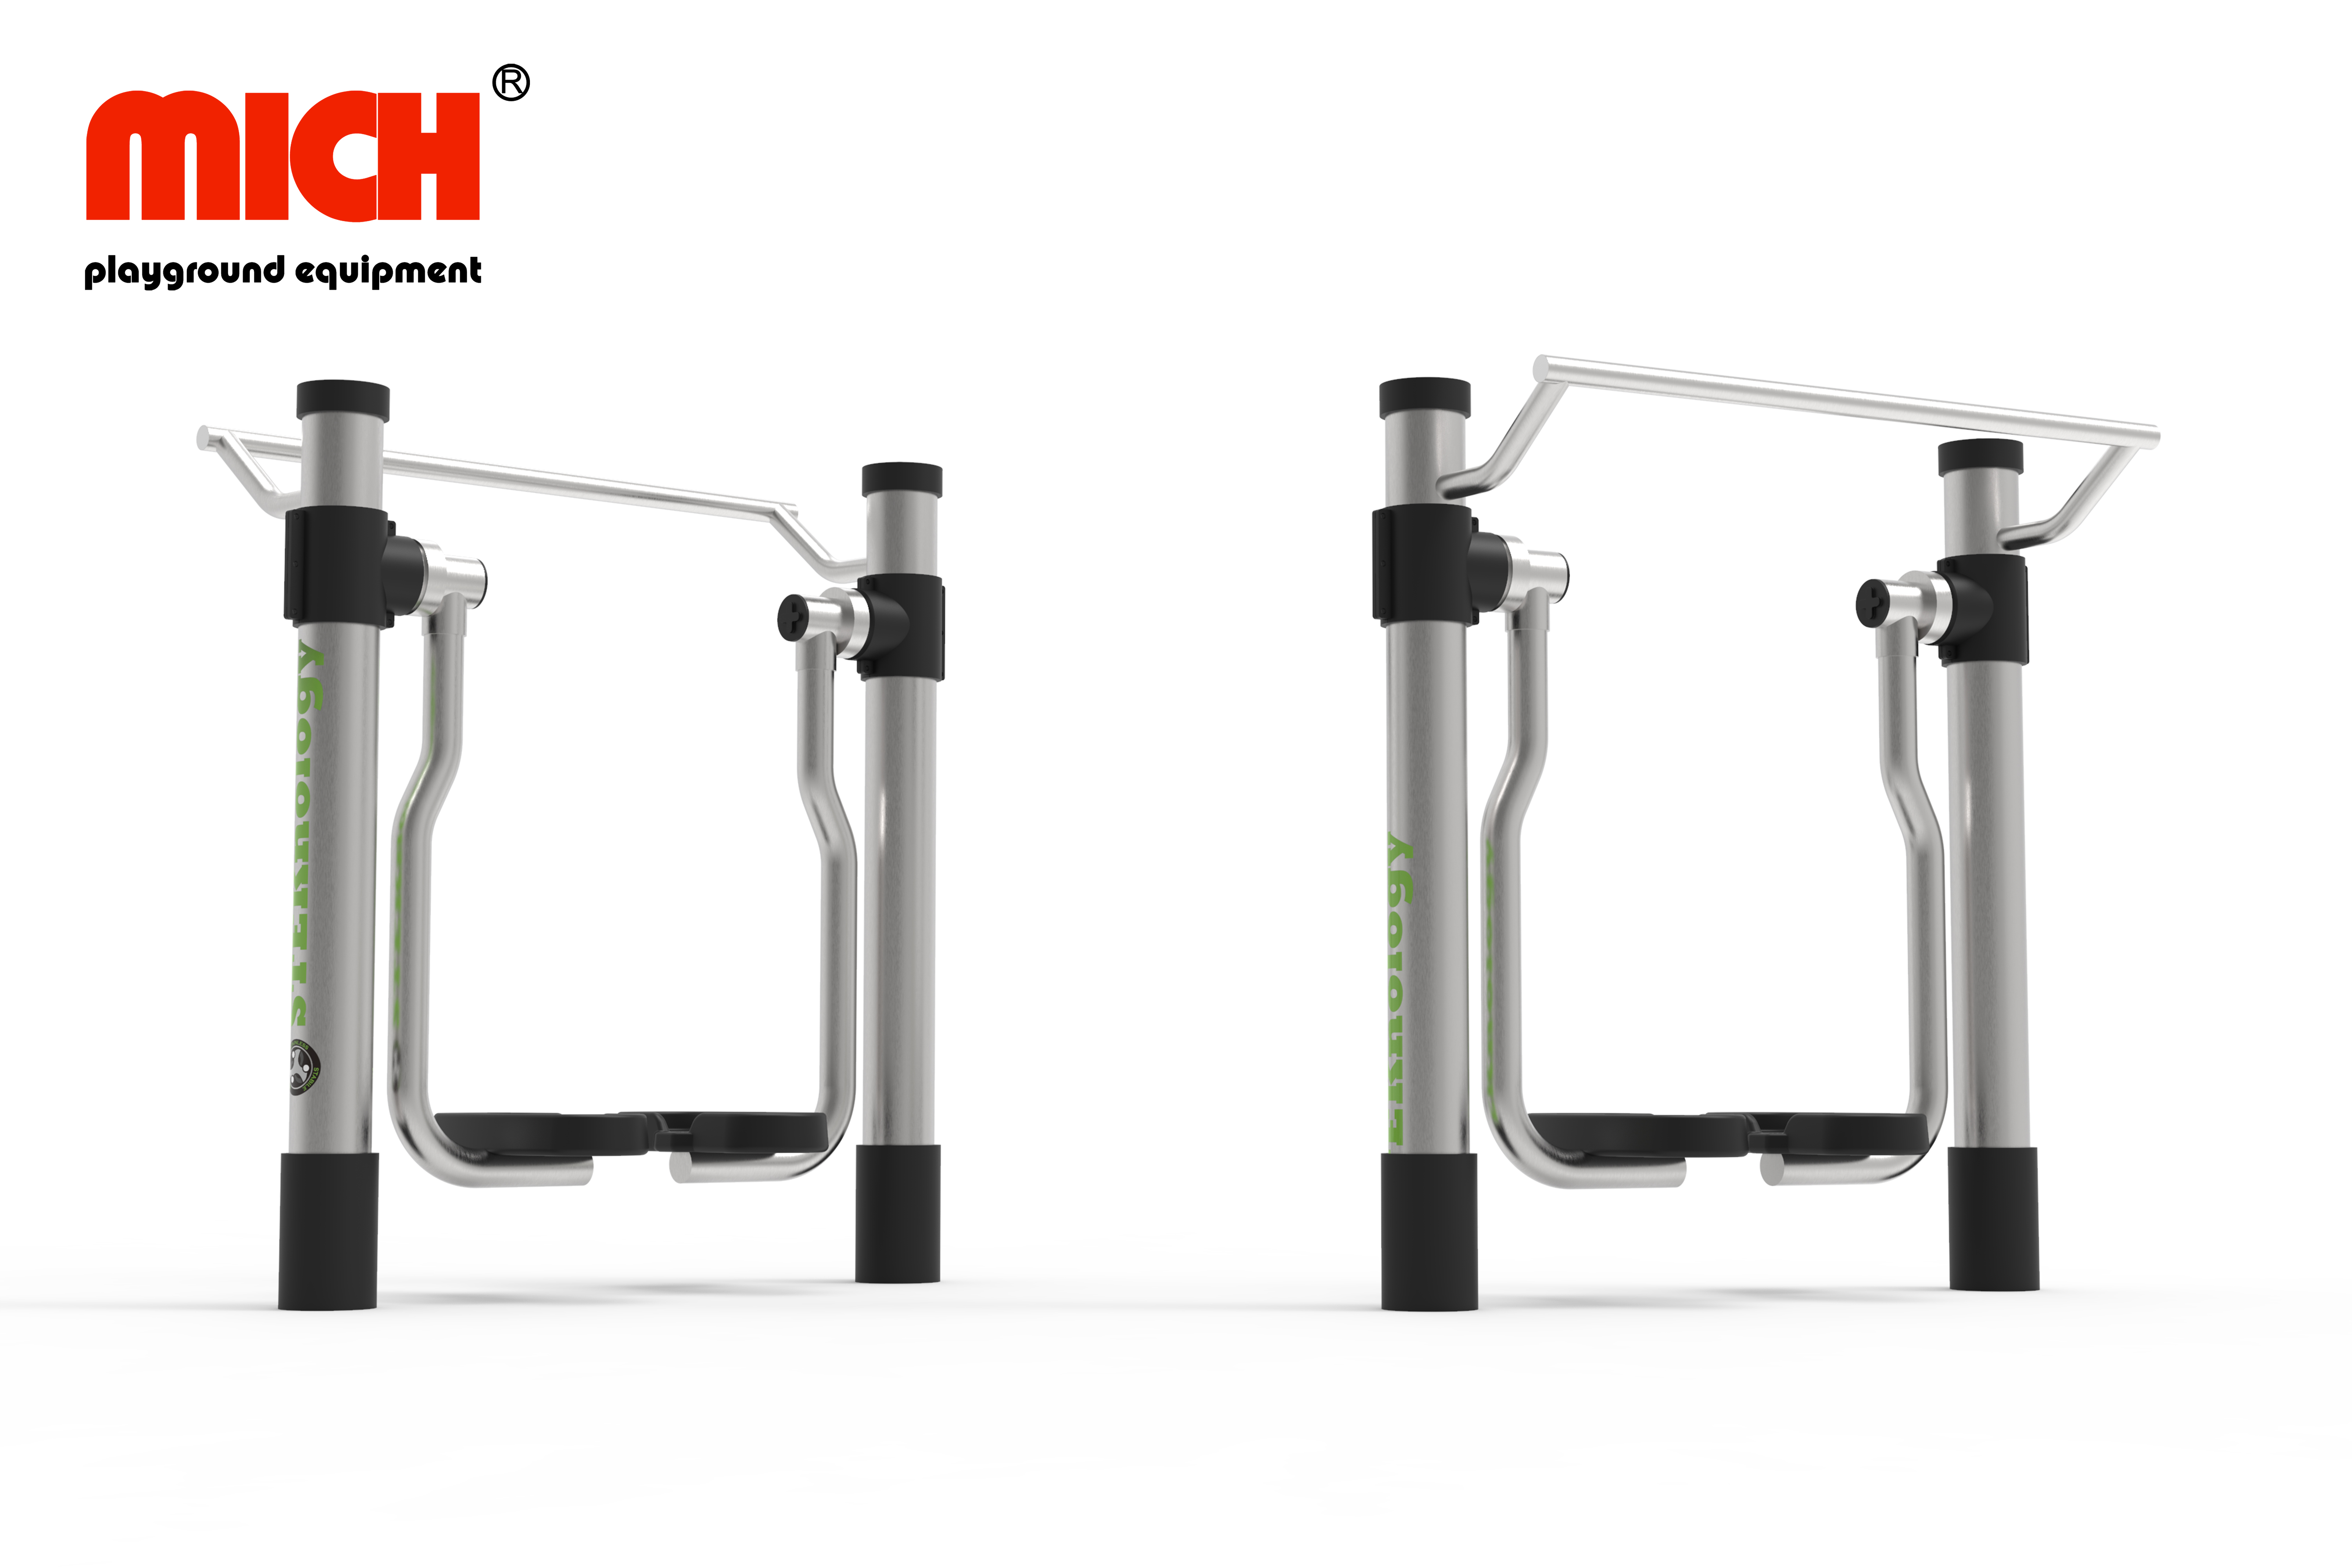 Stainless Steel Outdoor Fitness Equipment with Double Flat Walker